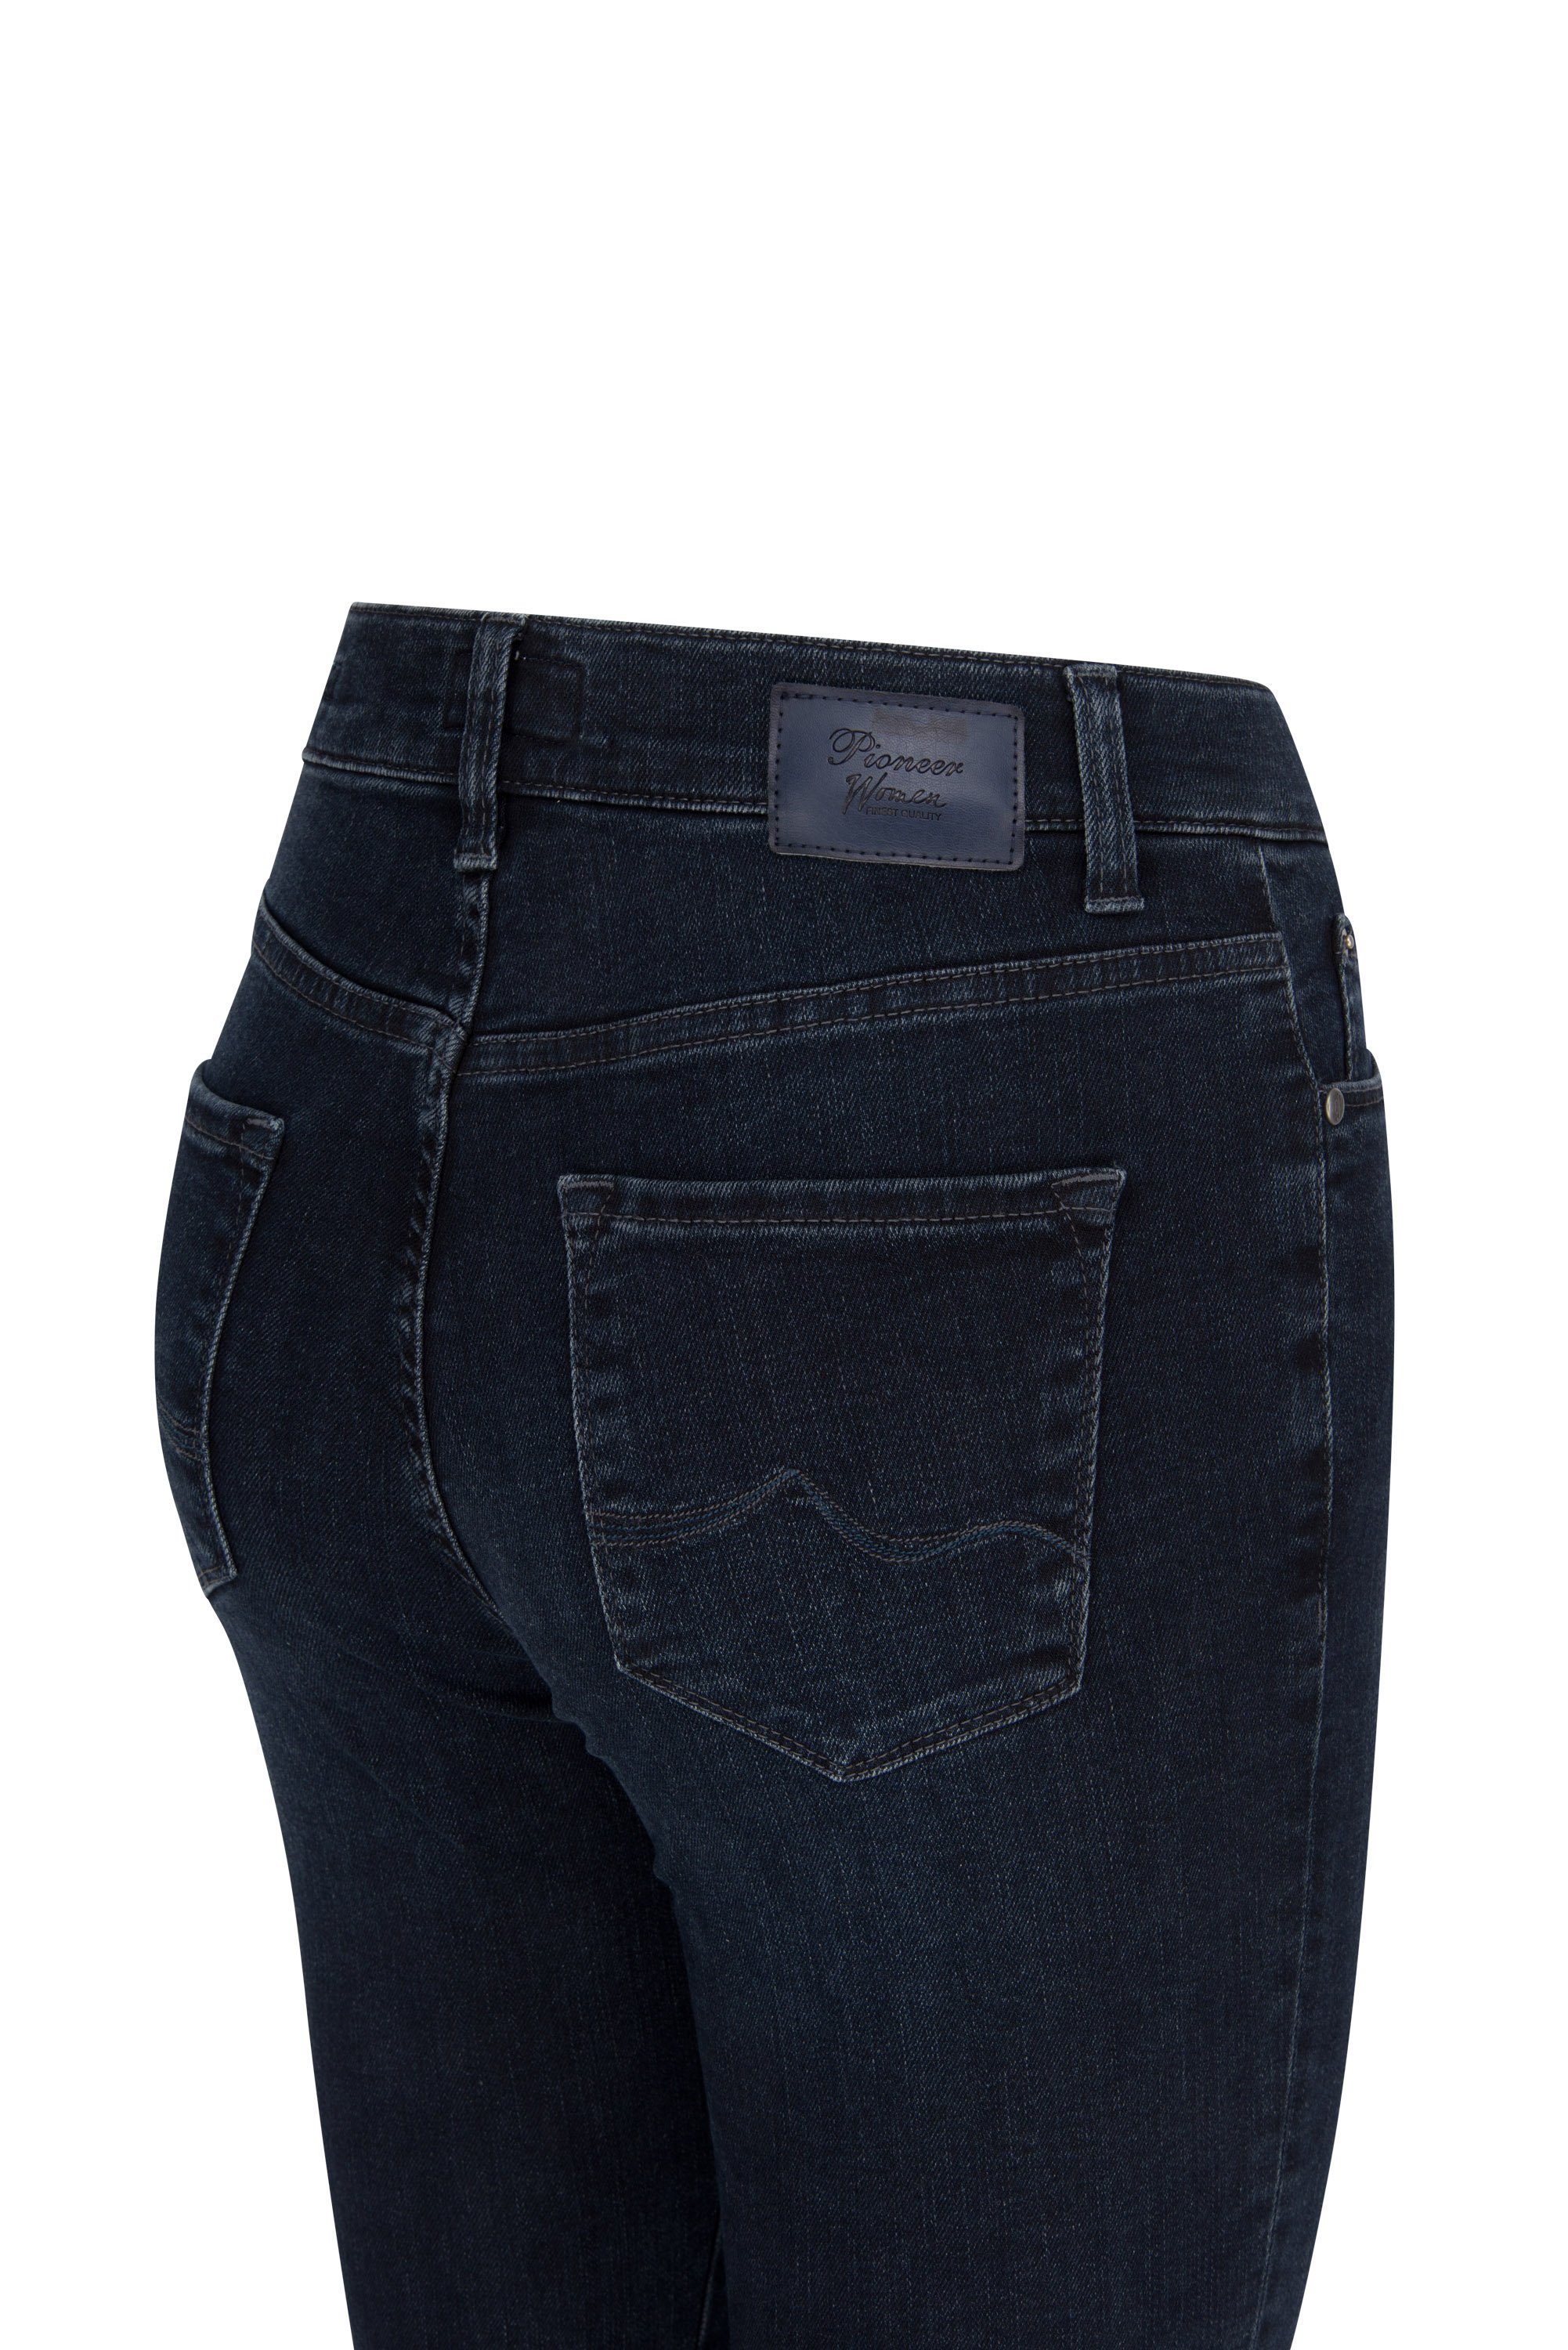 - KATY Stretch-Jeans 5011.62 PIONEER Pioneer blue 3011 out dark washed Jeans POWERSTRETCH Authentic